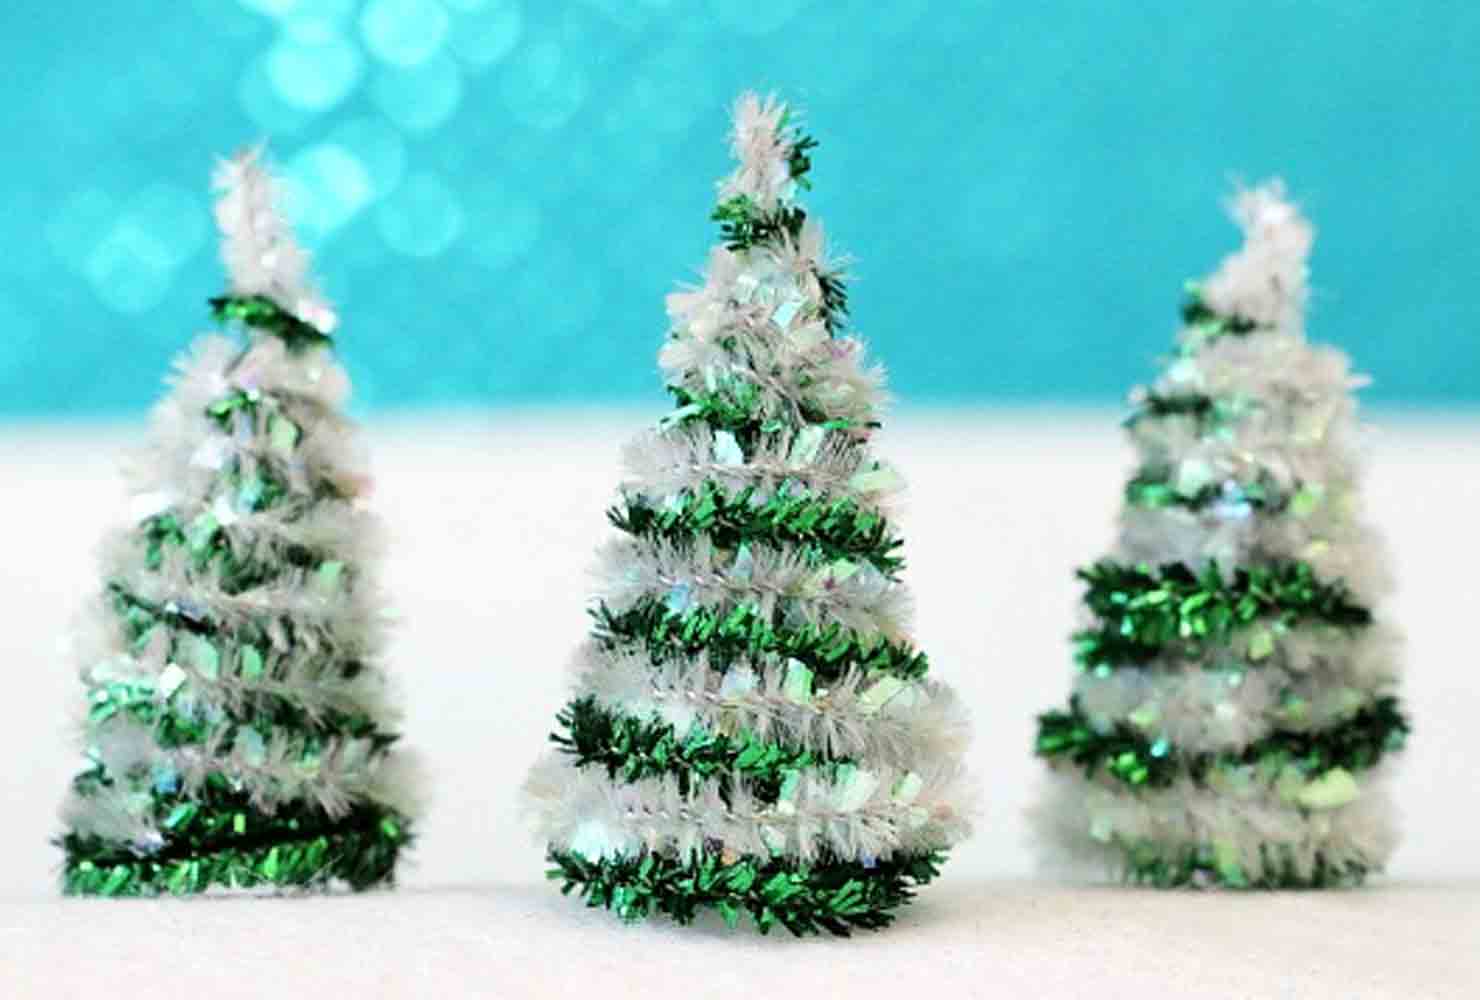 green Christmas tree made of pipe cleaners